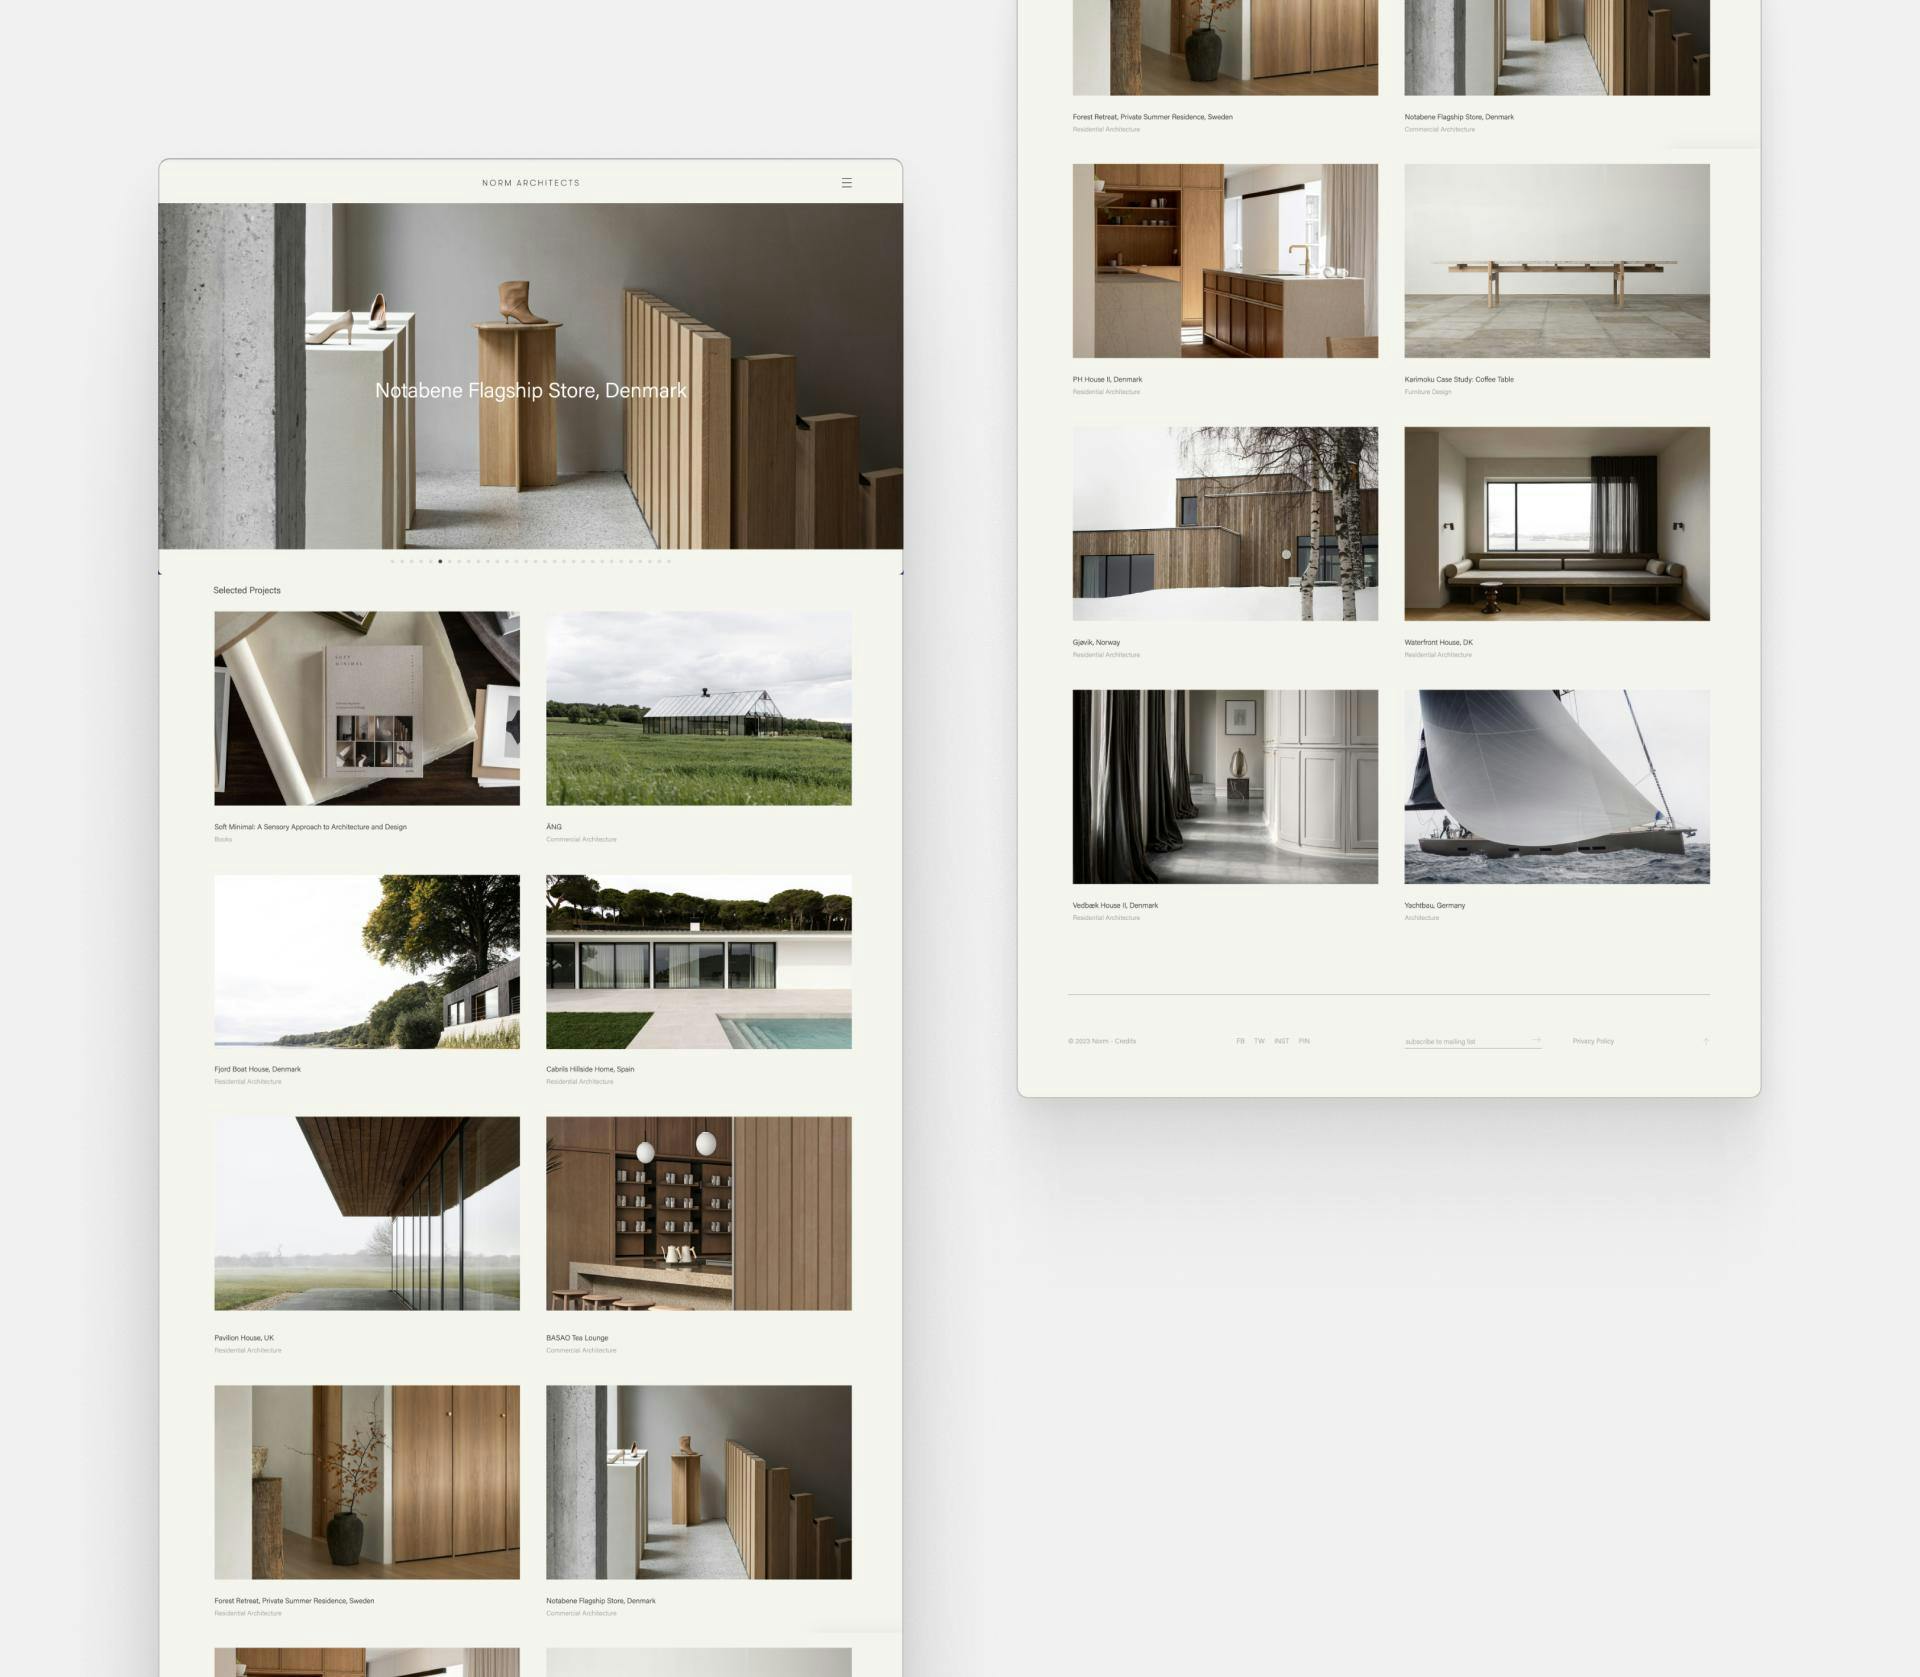 Website of Norm Architects. With a light background and a slider of their project images.